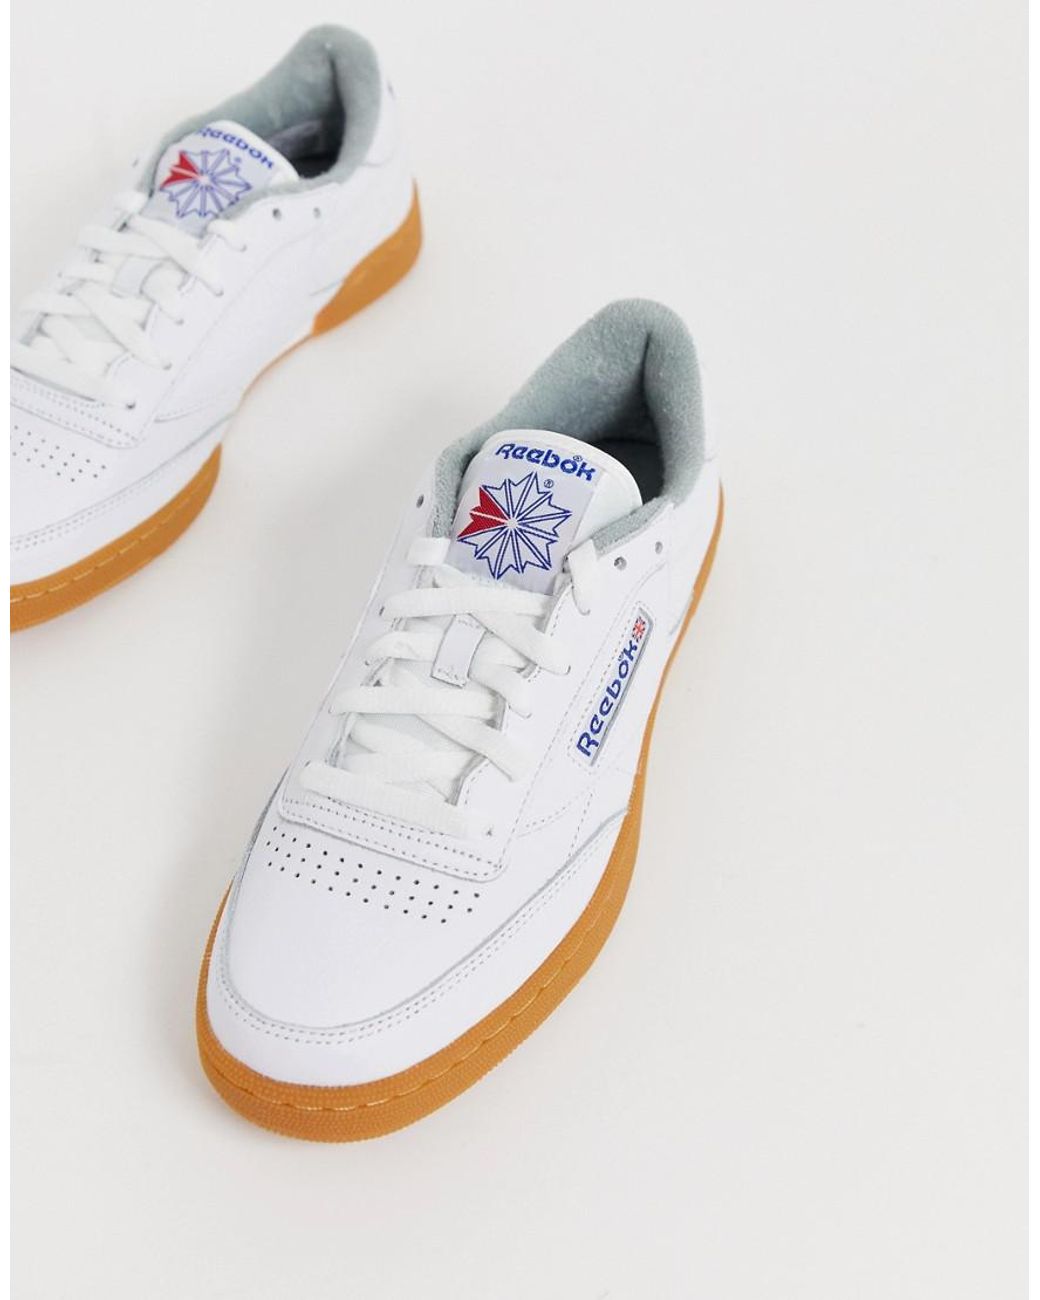 Reebok Classic Revenge Plus Sneakers With Gum Sole In White | islamiyyat.com